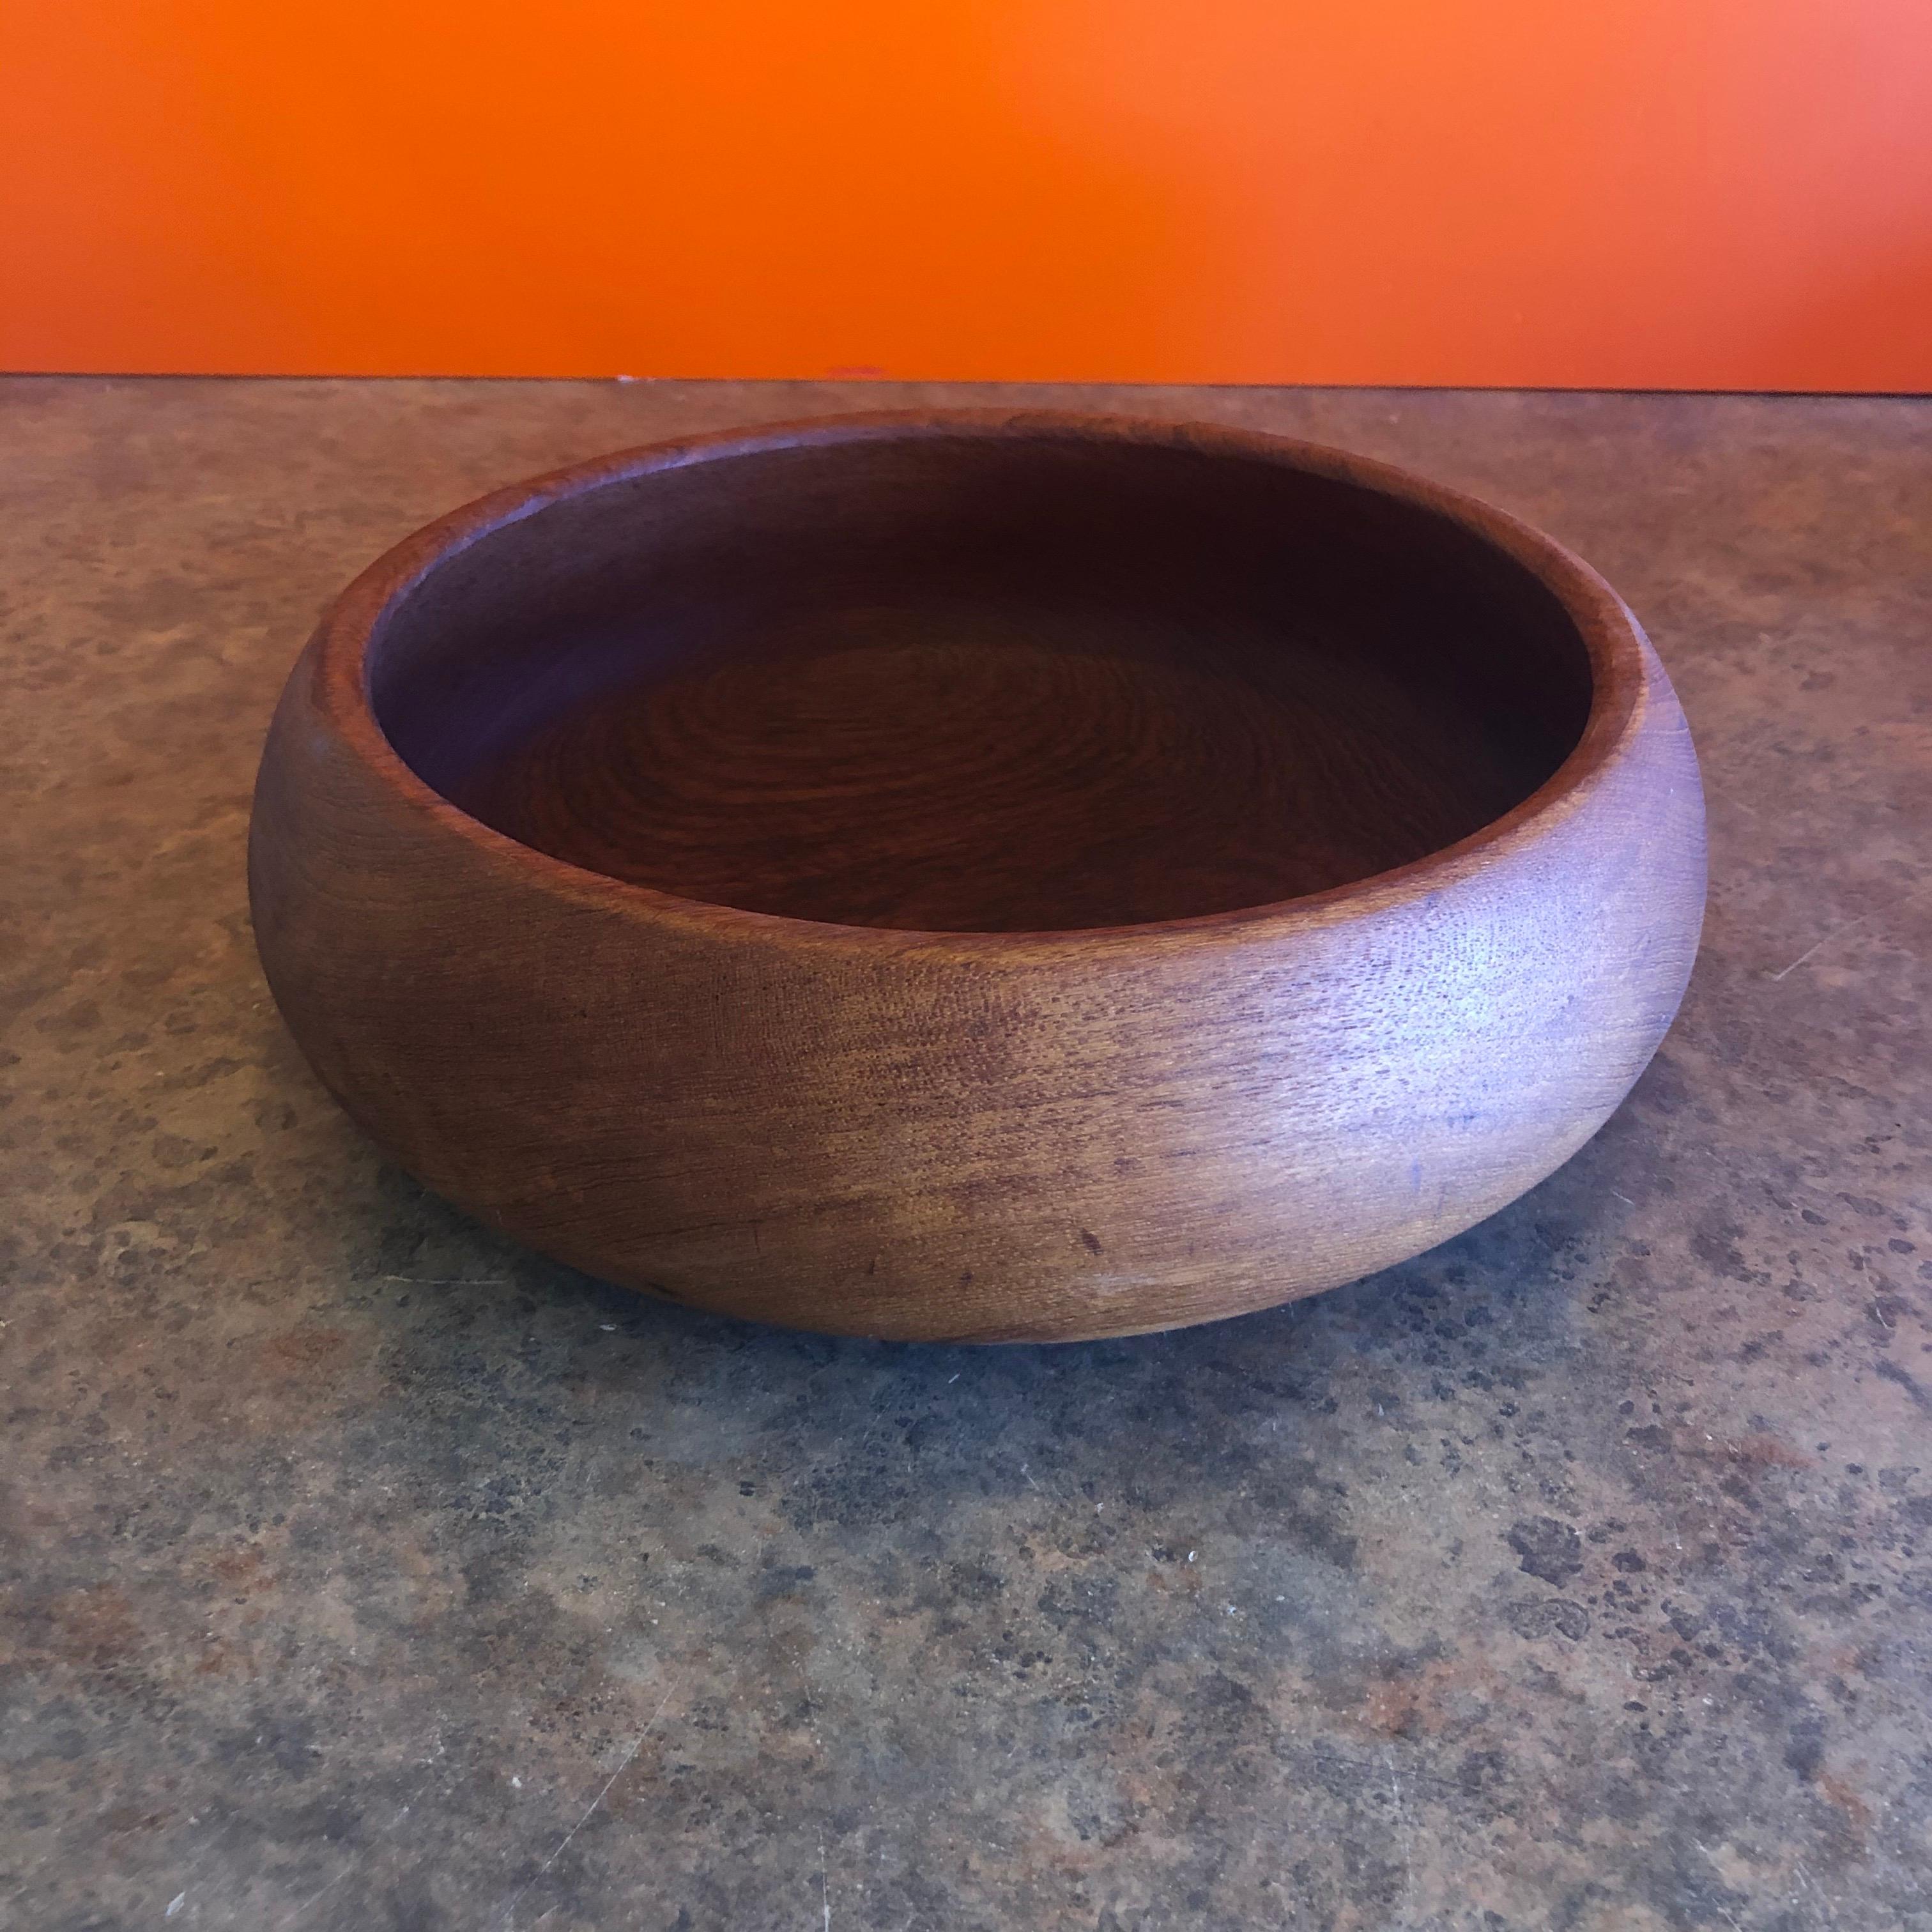 A beautiful Danish modern solid teak bowl in the style of Jens Quistgaard for Dansk, circa 1970s.